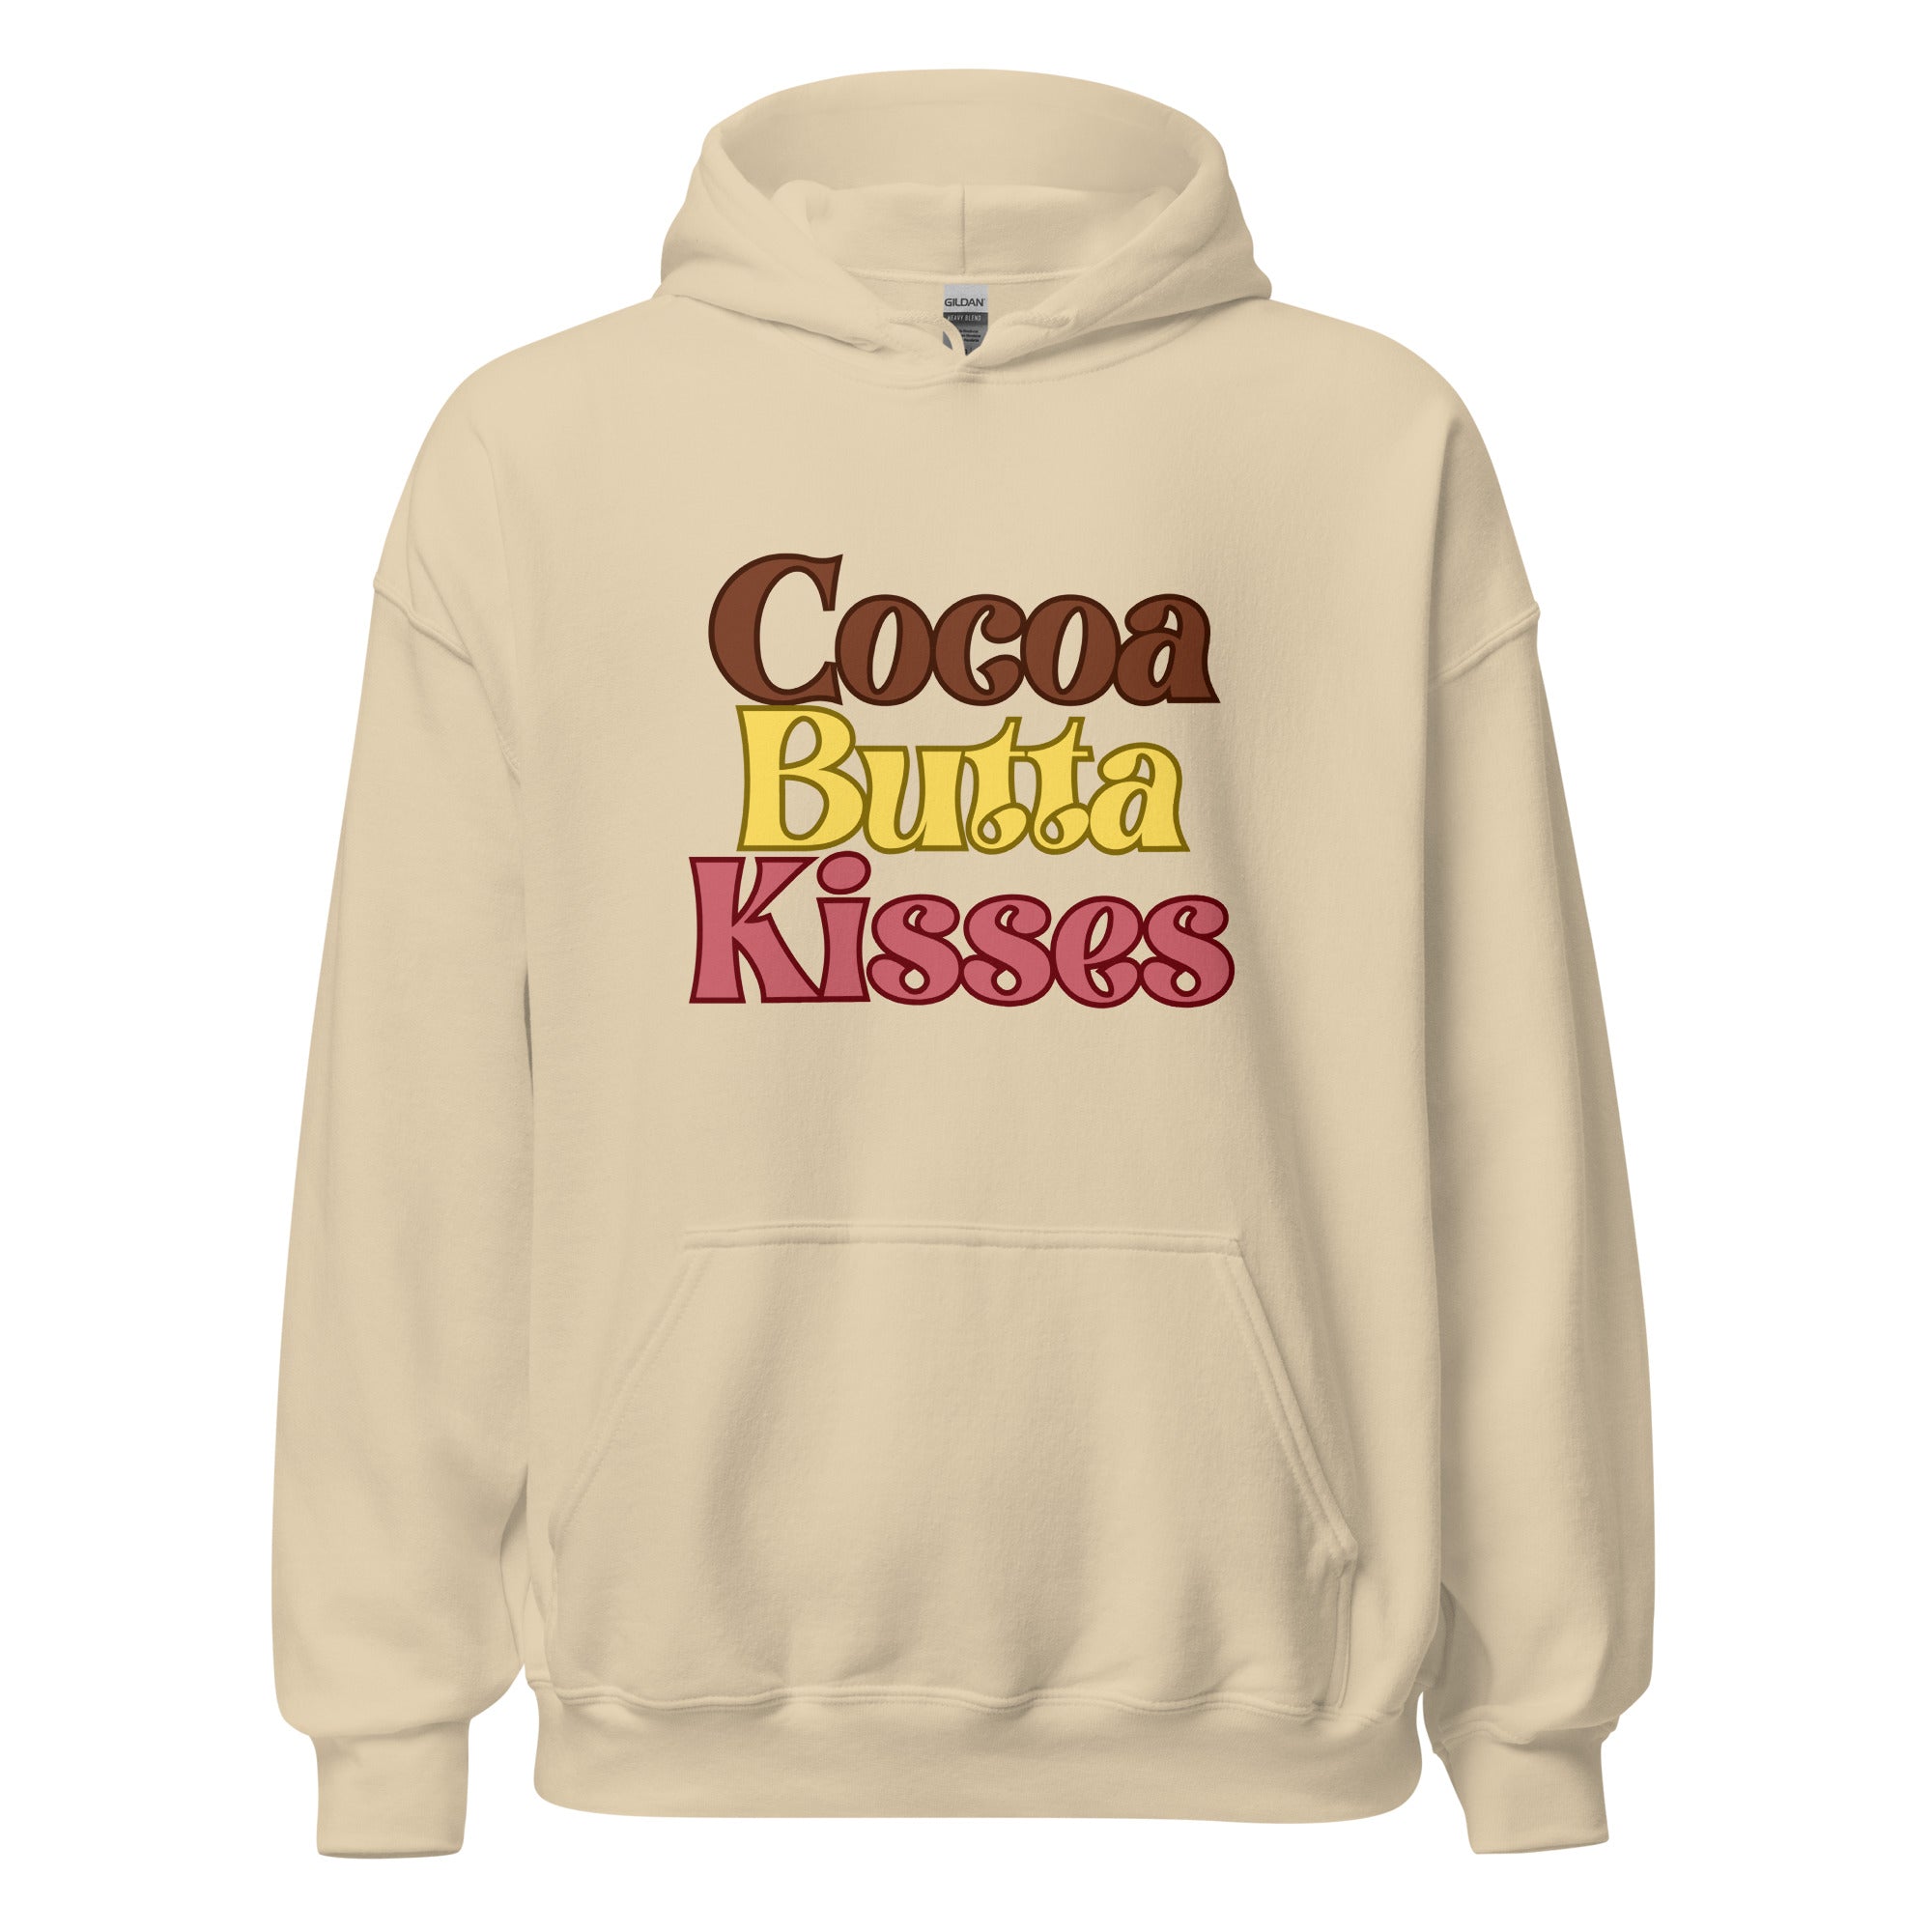 My Cocoa Butter Kisses Hoodie